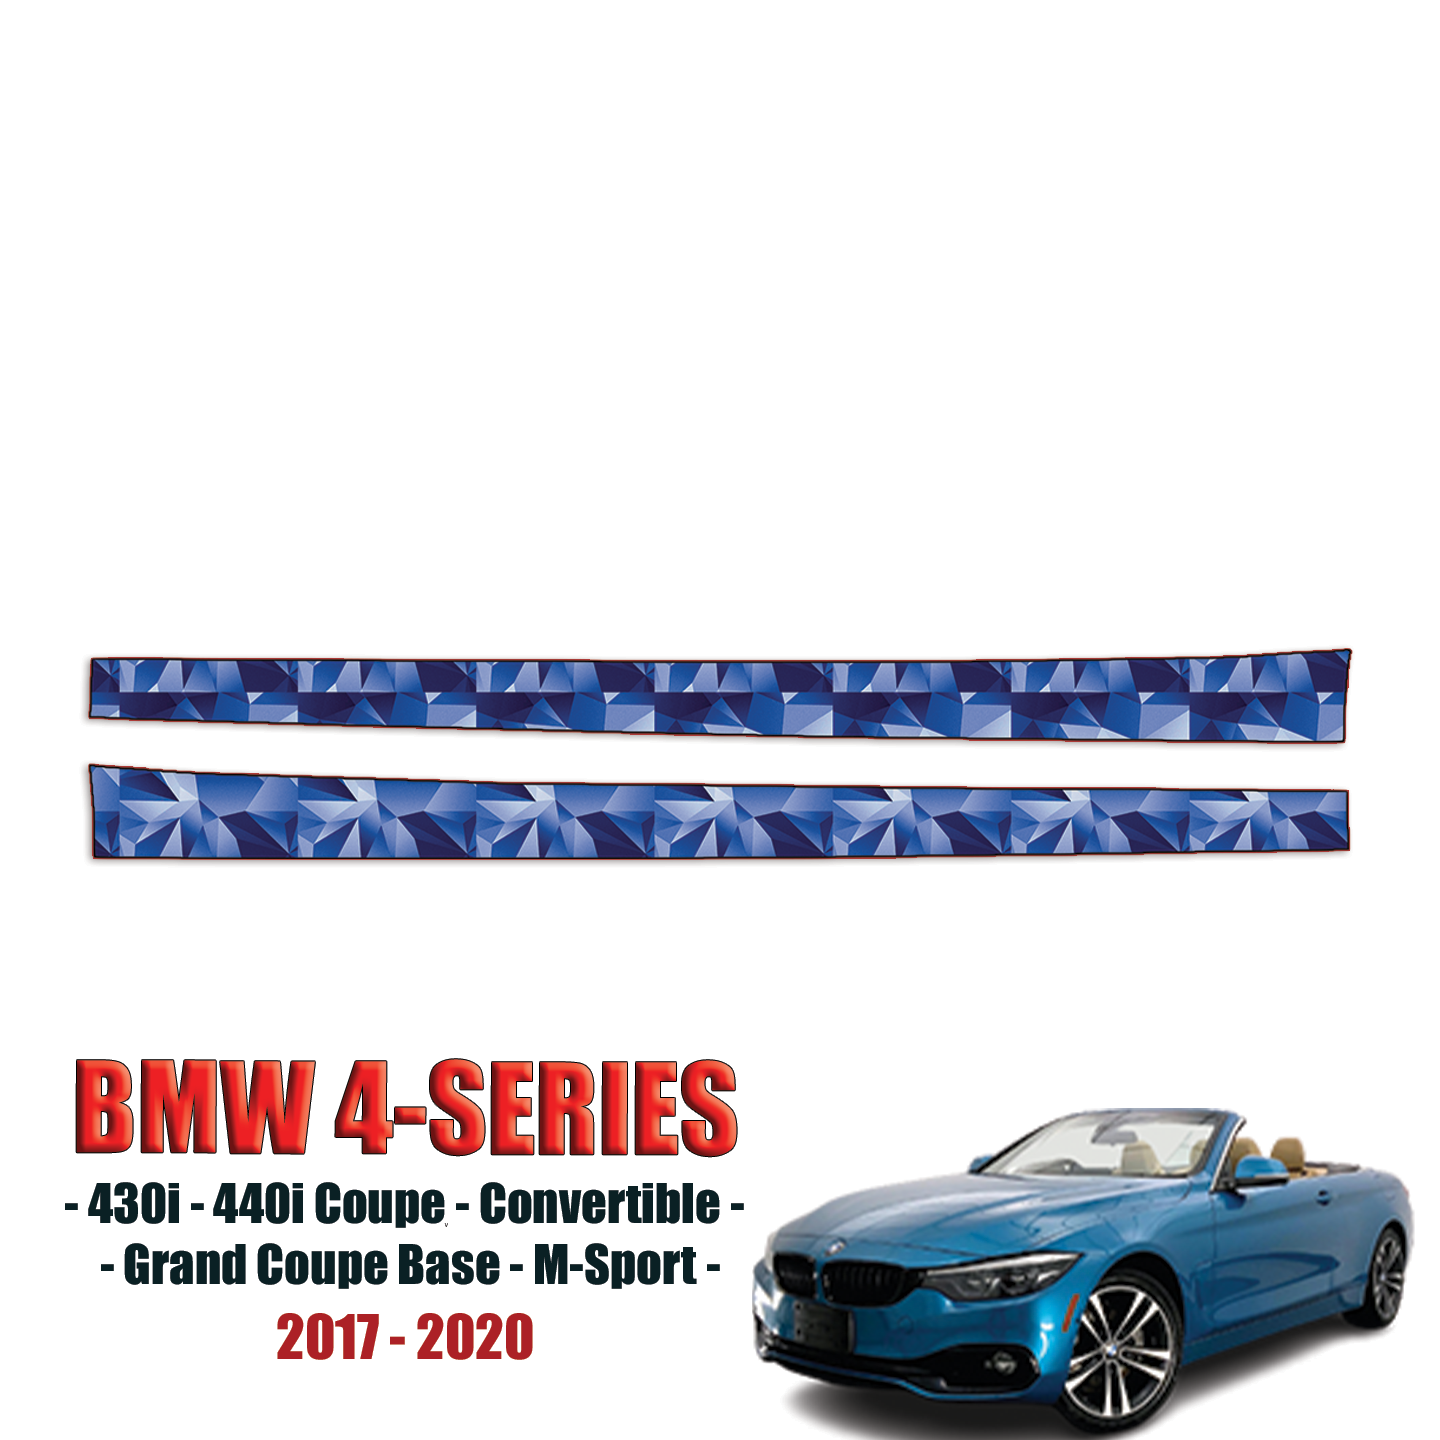 2017-2020 BMW 4-Series 430i, 440i Coupe, Convertible, Grand Coupe Luxury Precut Paint Protection Kit – Rocker Panels